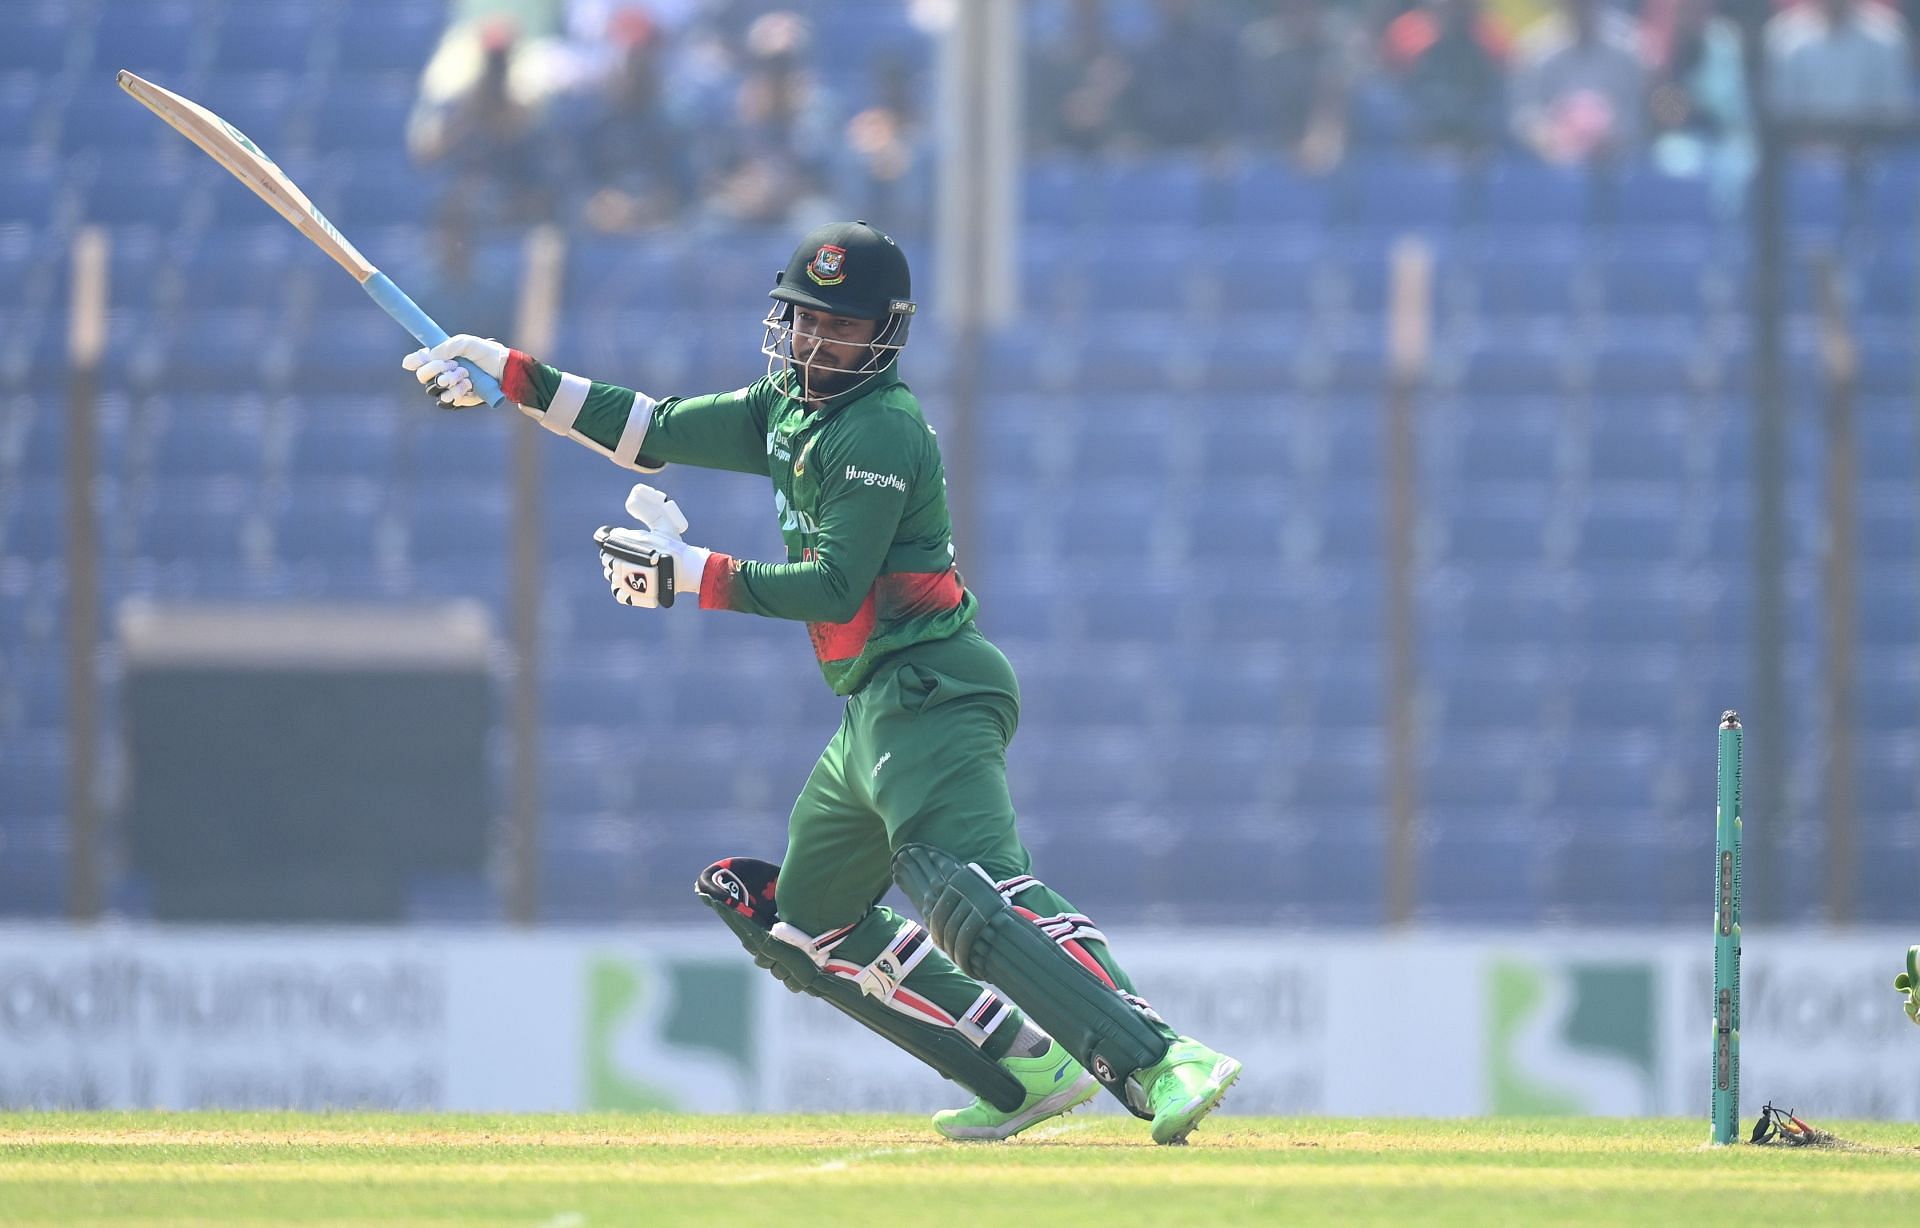 Bangladesh vs Ireland, 3rd T20I: Probable XIs, Match Prediction, Weather Forecast, Pitch Report, and Live Streaming Details